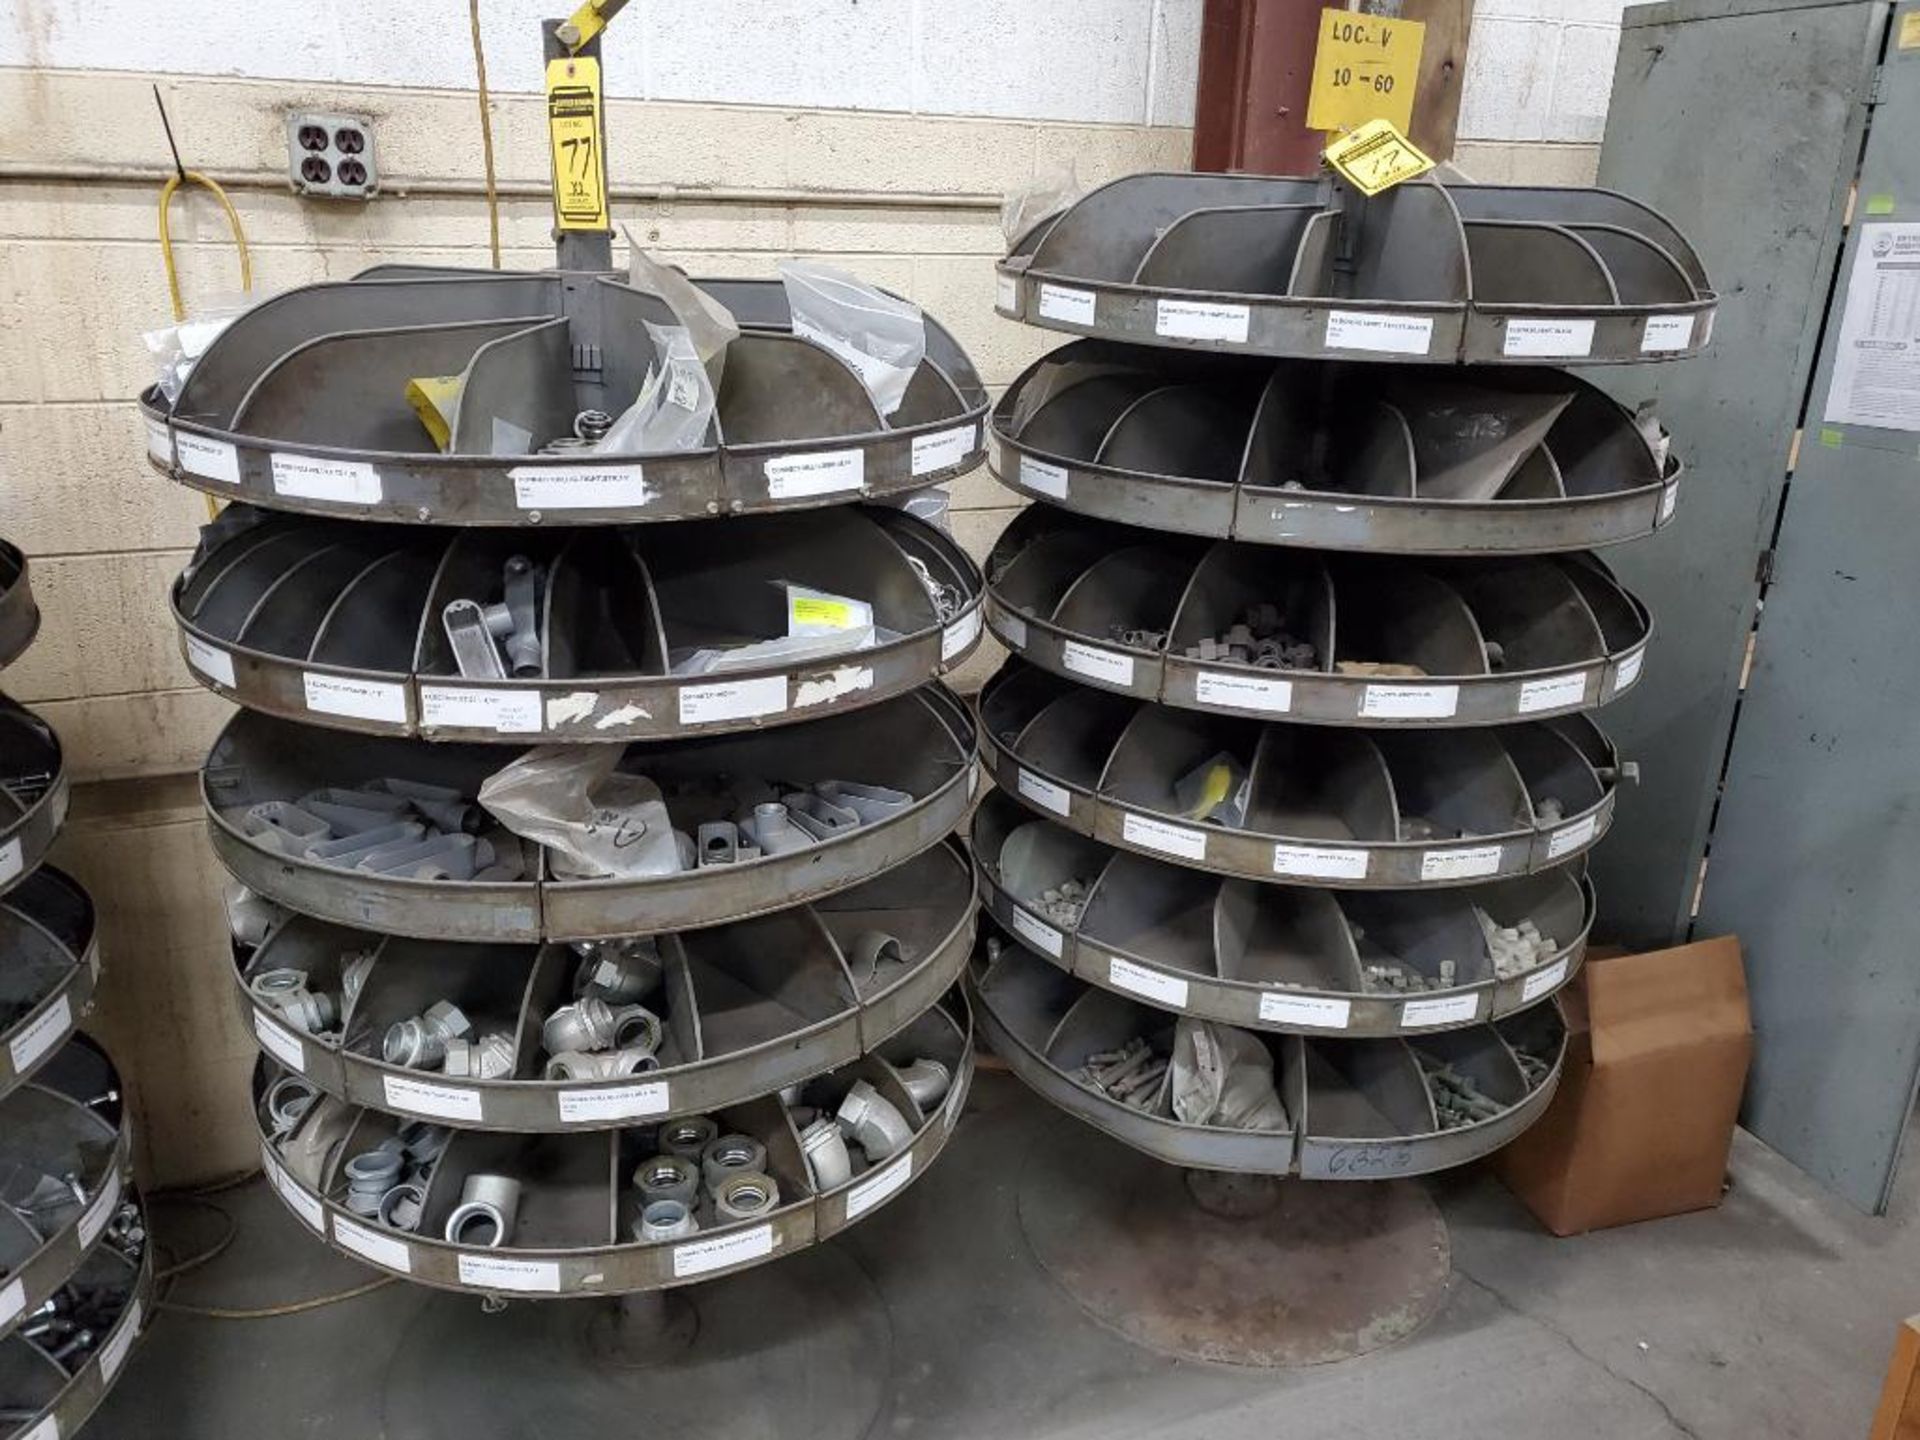 (2) 6-Tier Roto-Bin Parts Carousels w/ Hardware; Bolts, Washers, Nuts, Electrical Conduit Parts, Uni